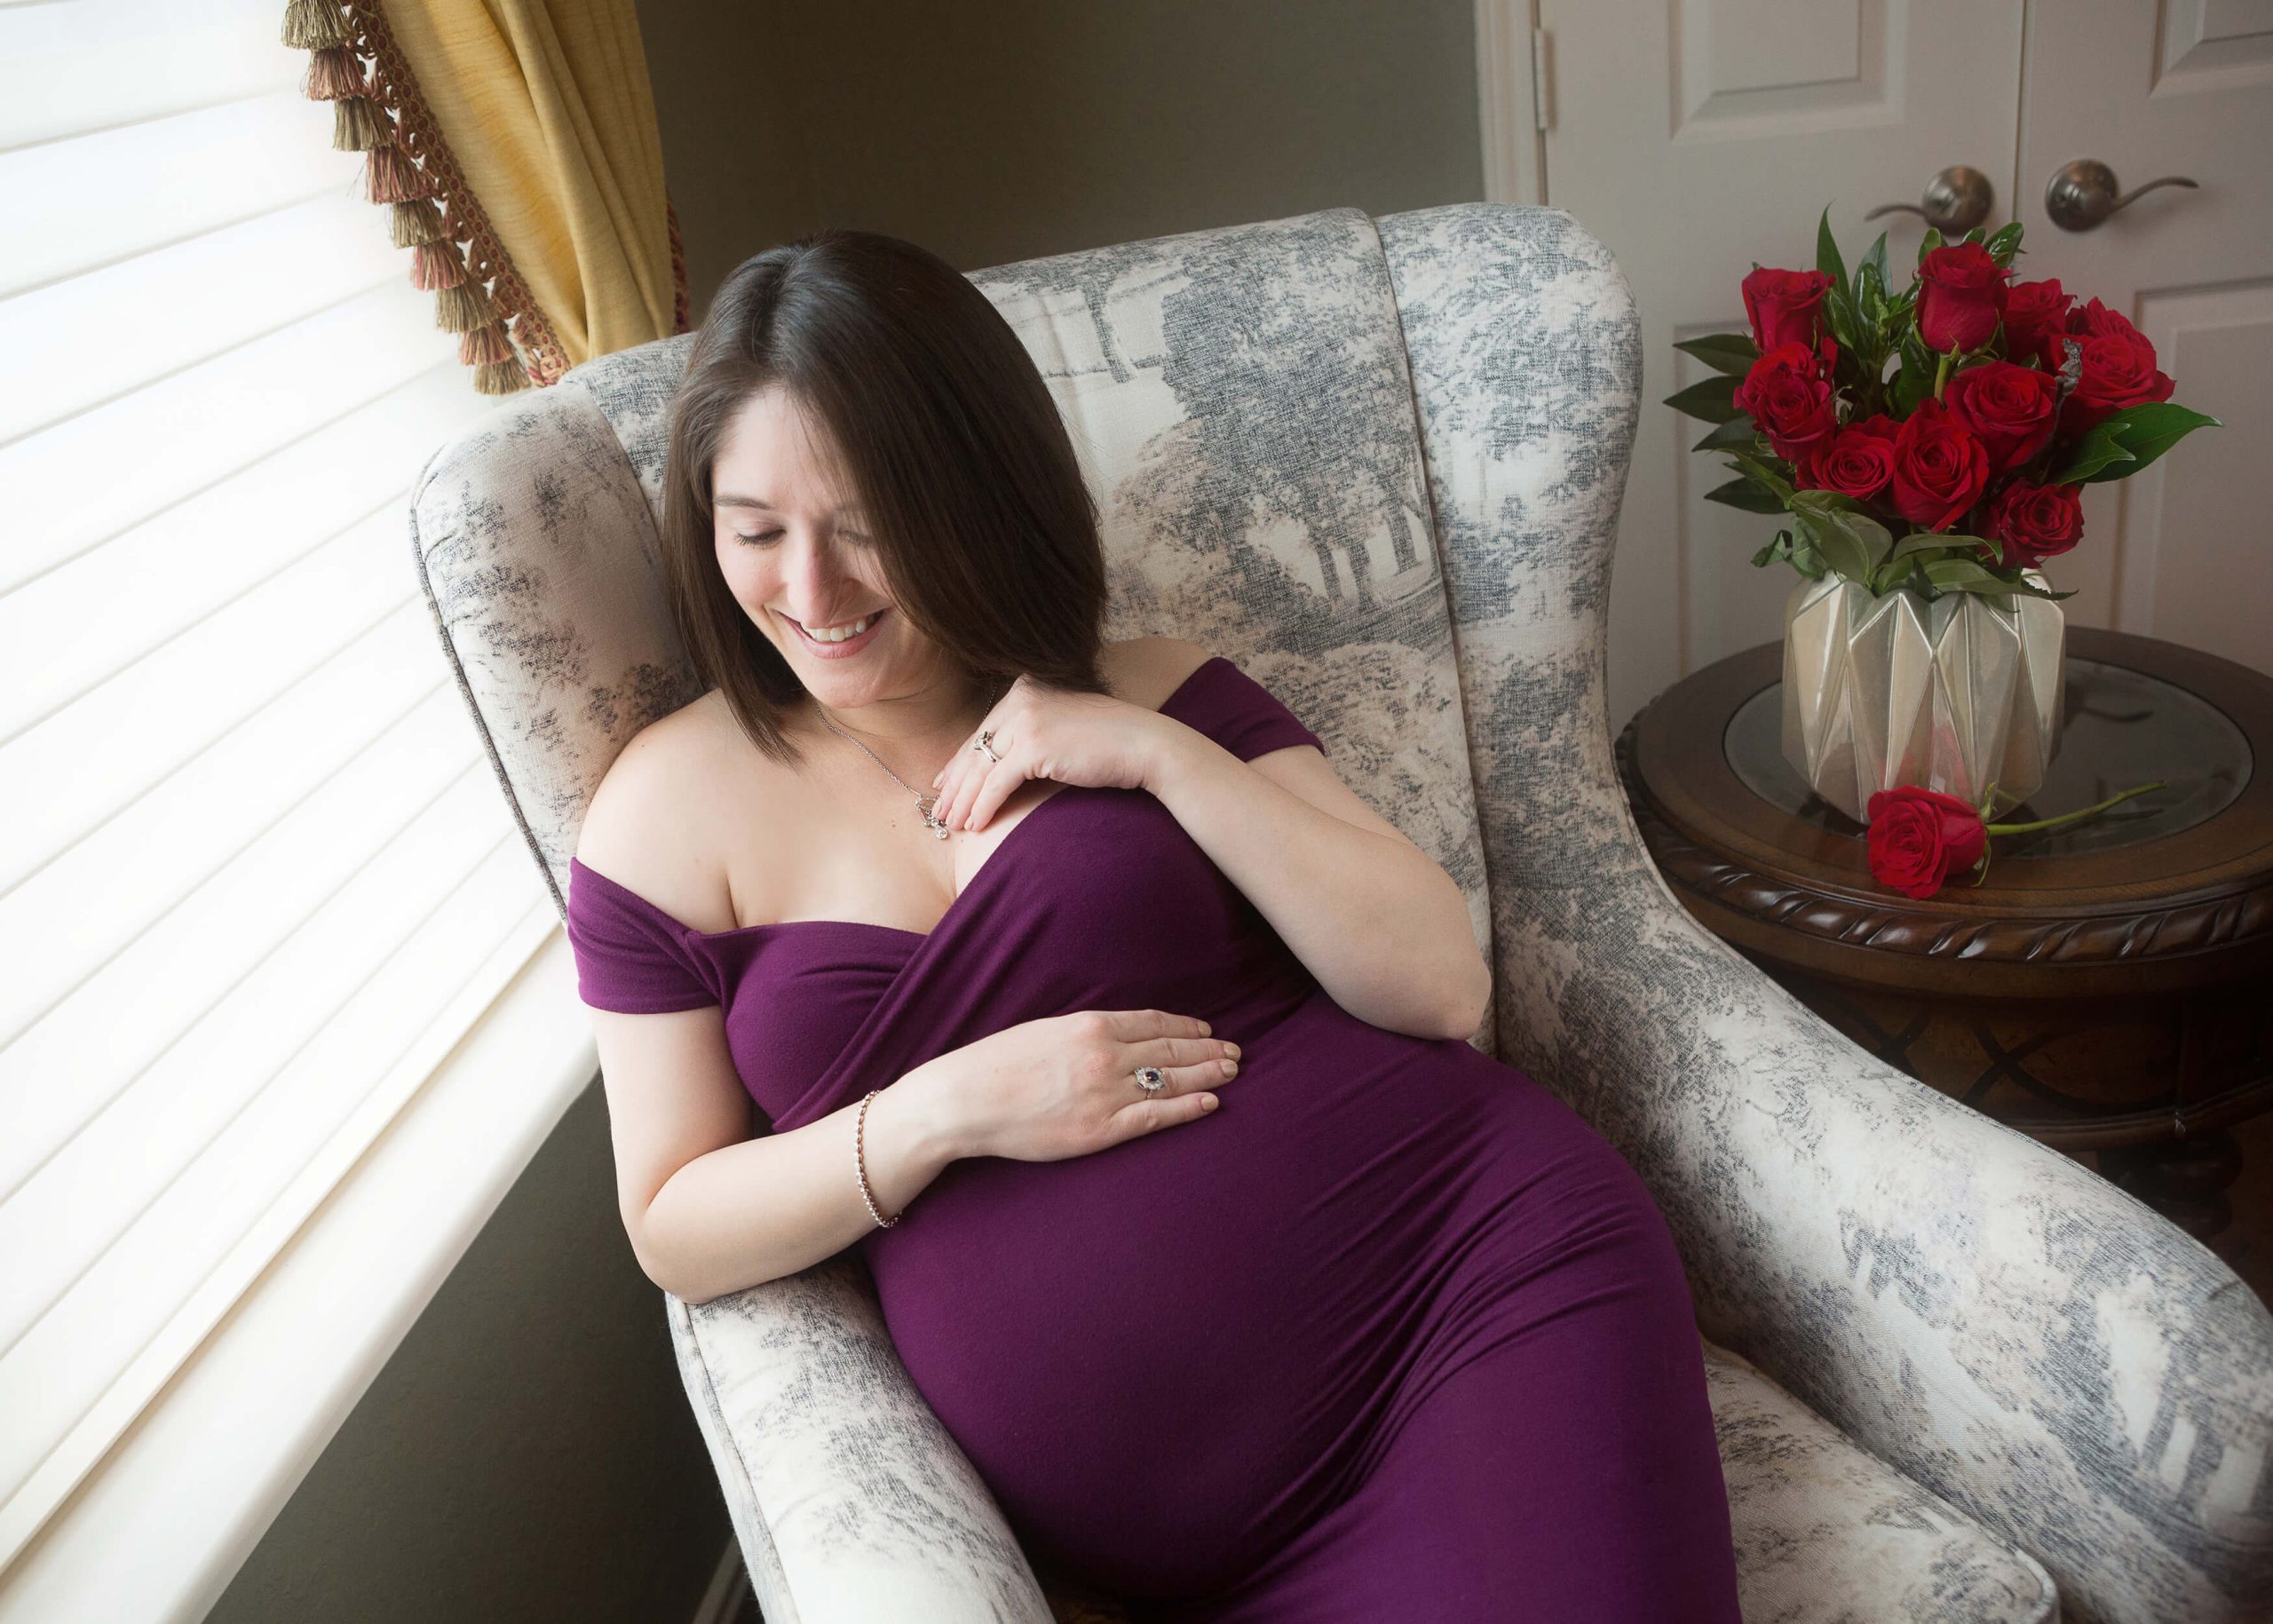 Choosing the Perfect Maternity Dress for Your Photoshoot